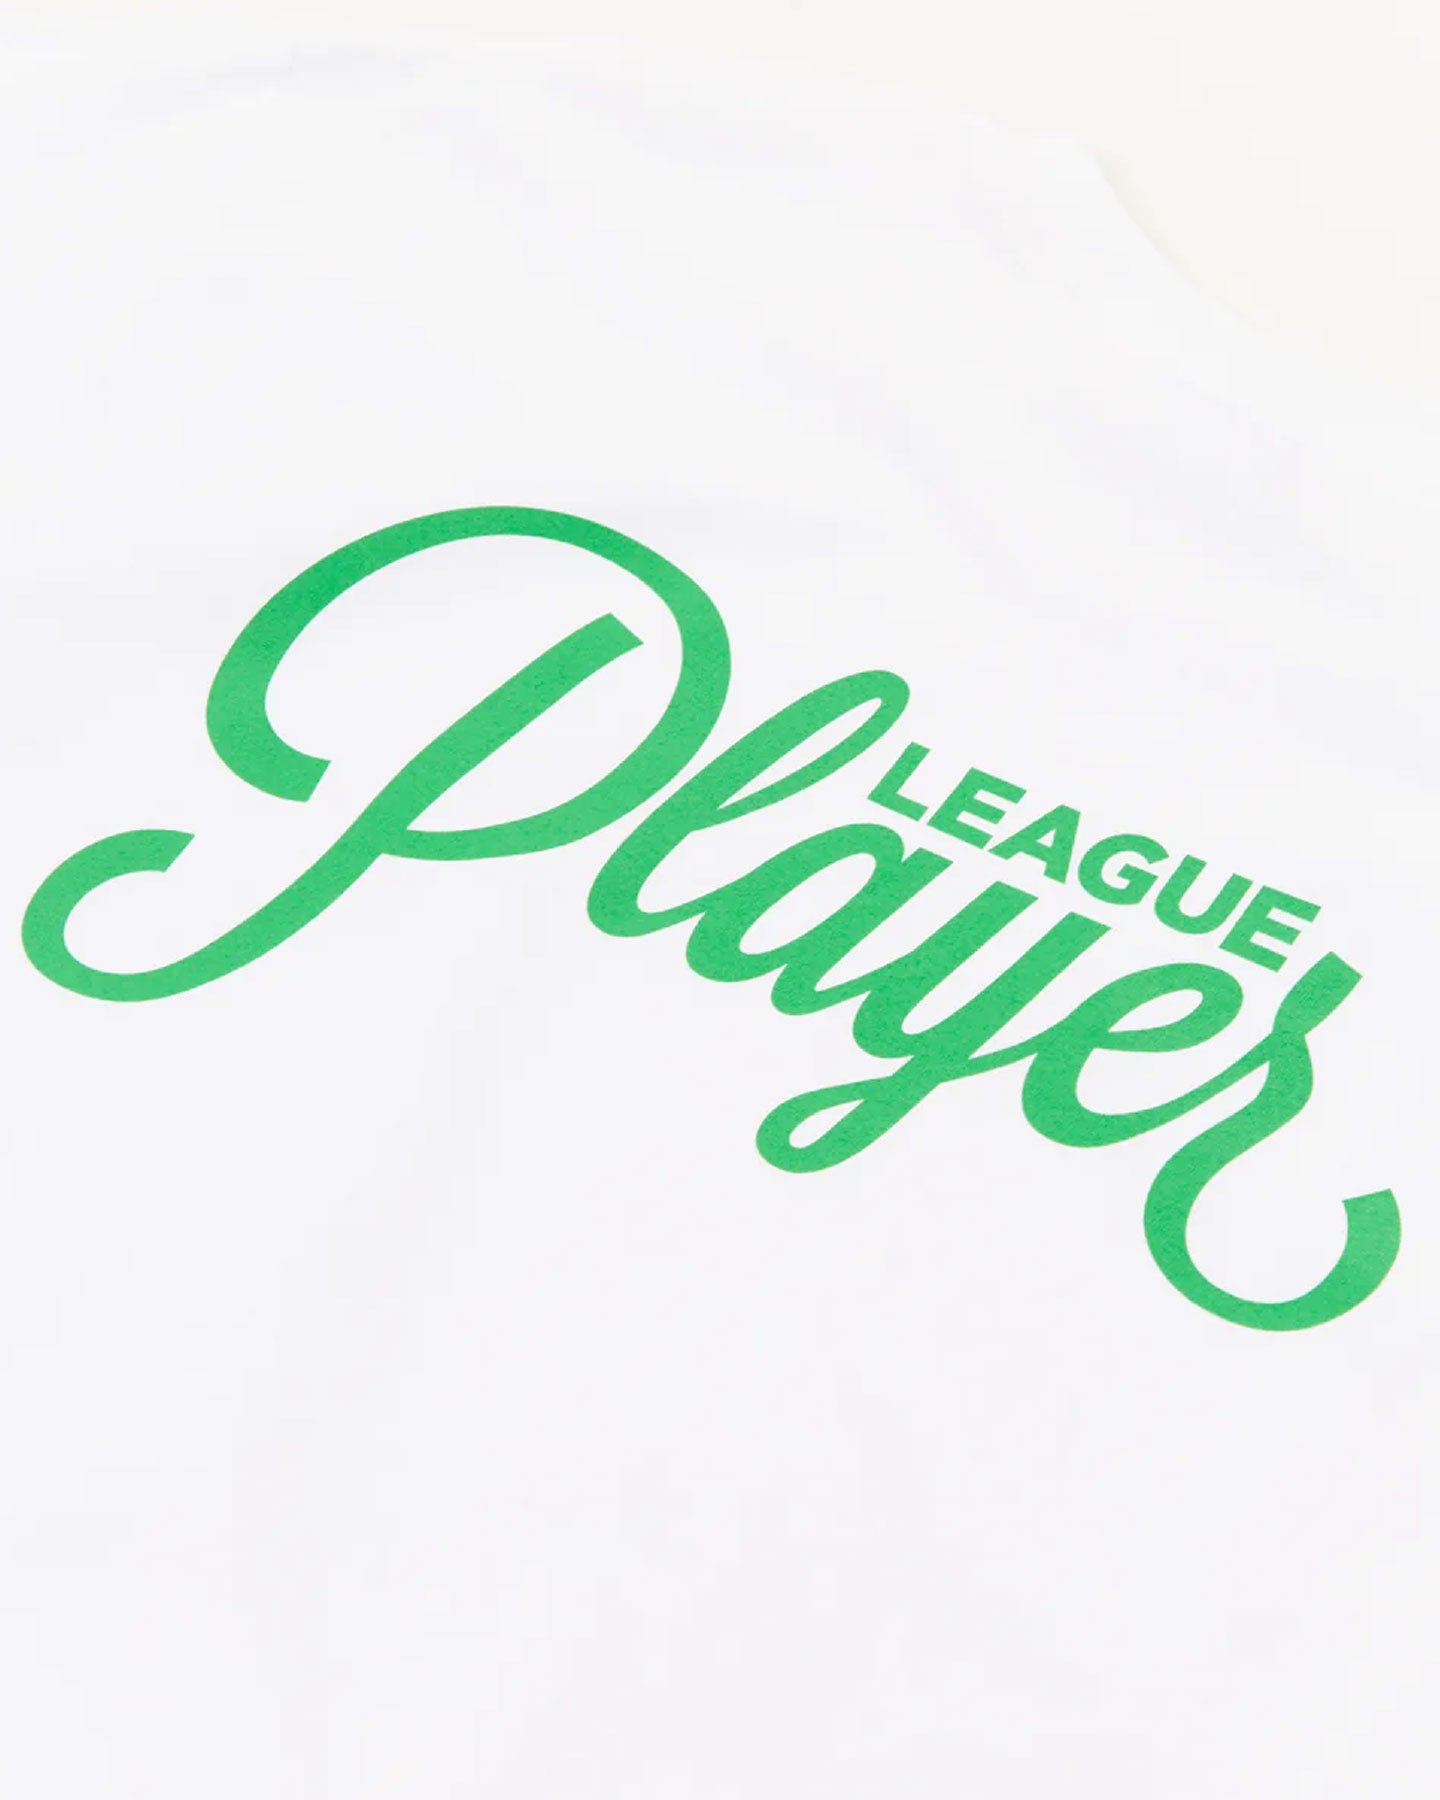 Alltimers League Player SS Tee - White